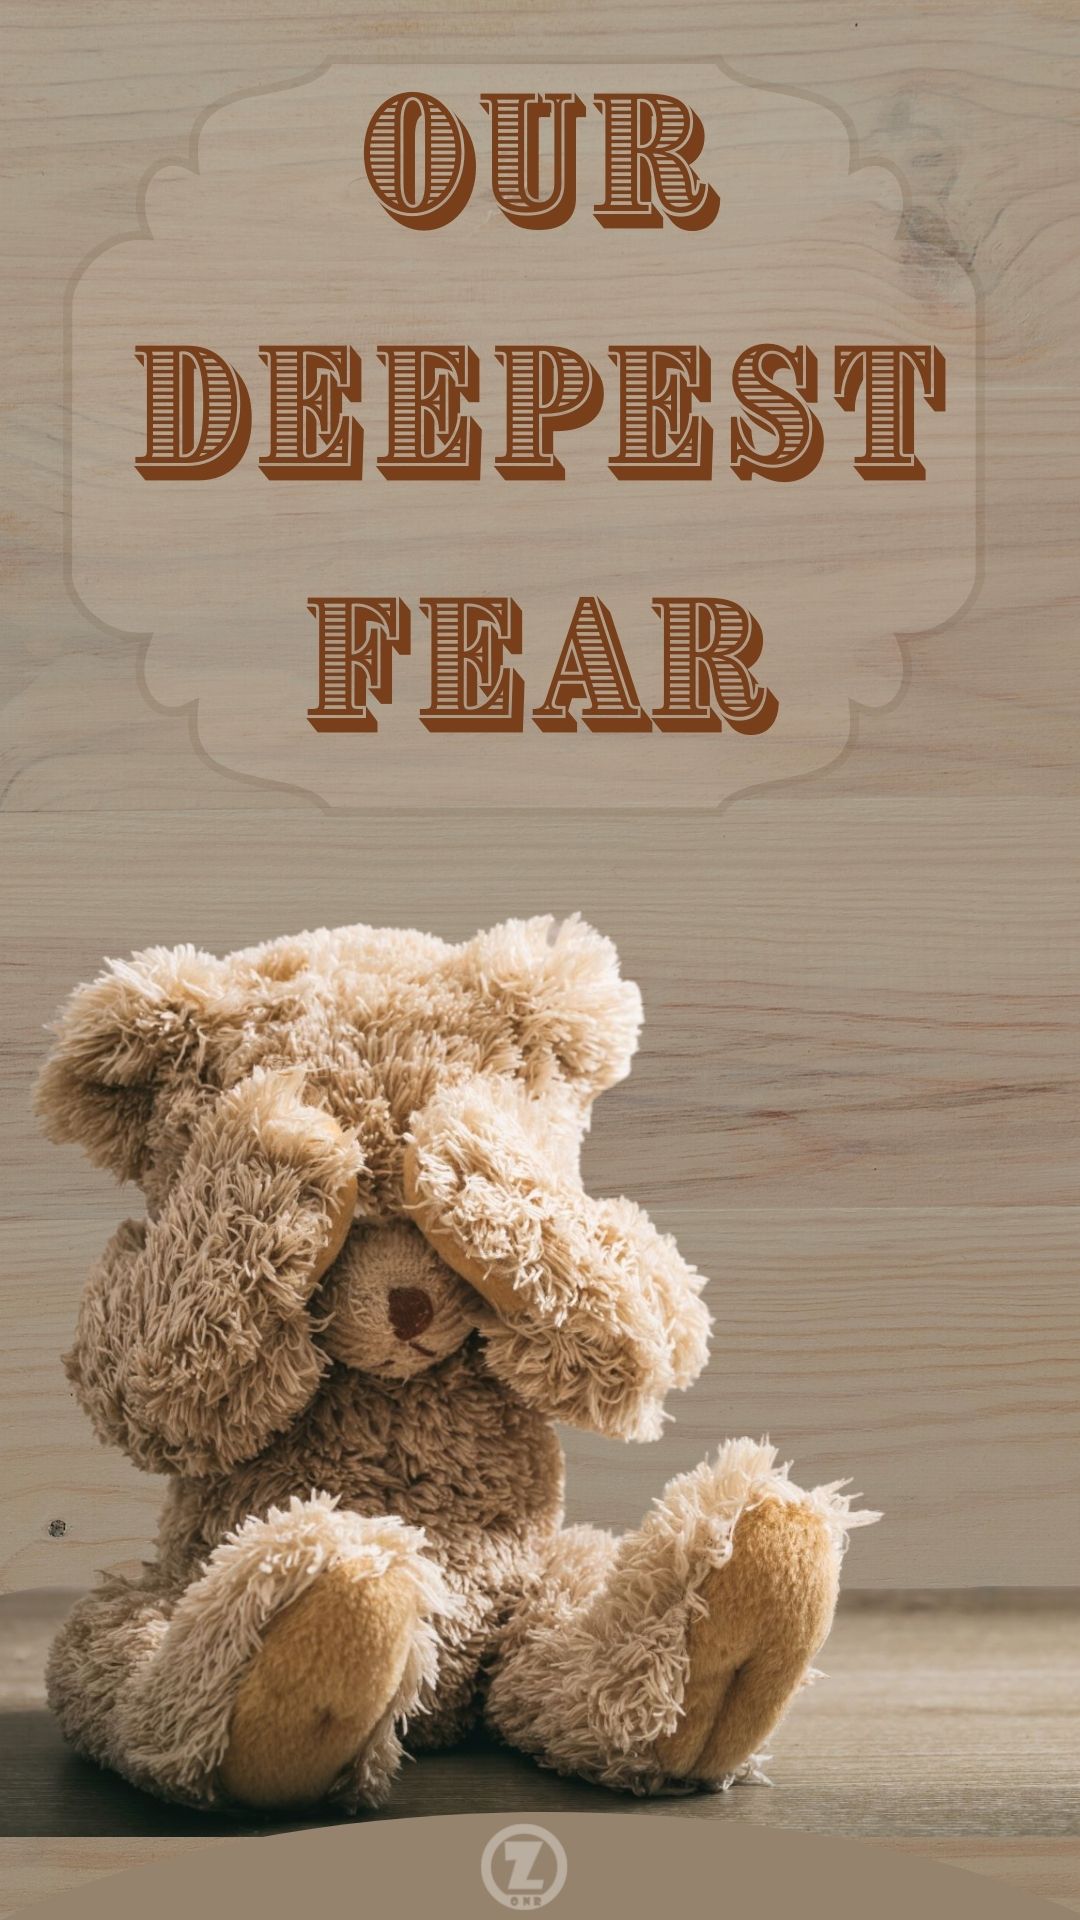 Coming to Terms with “Our Deepest Fear” – Step 12